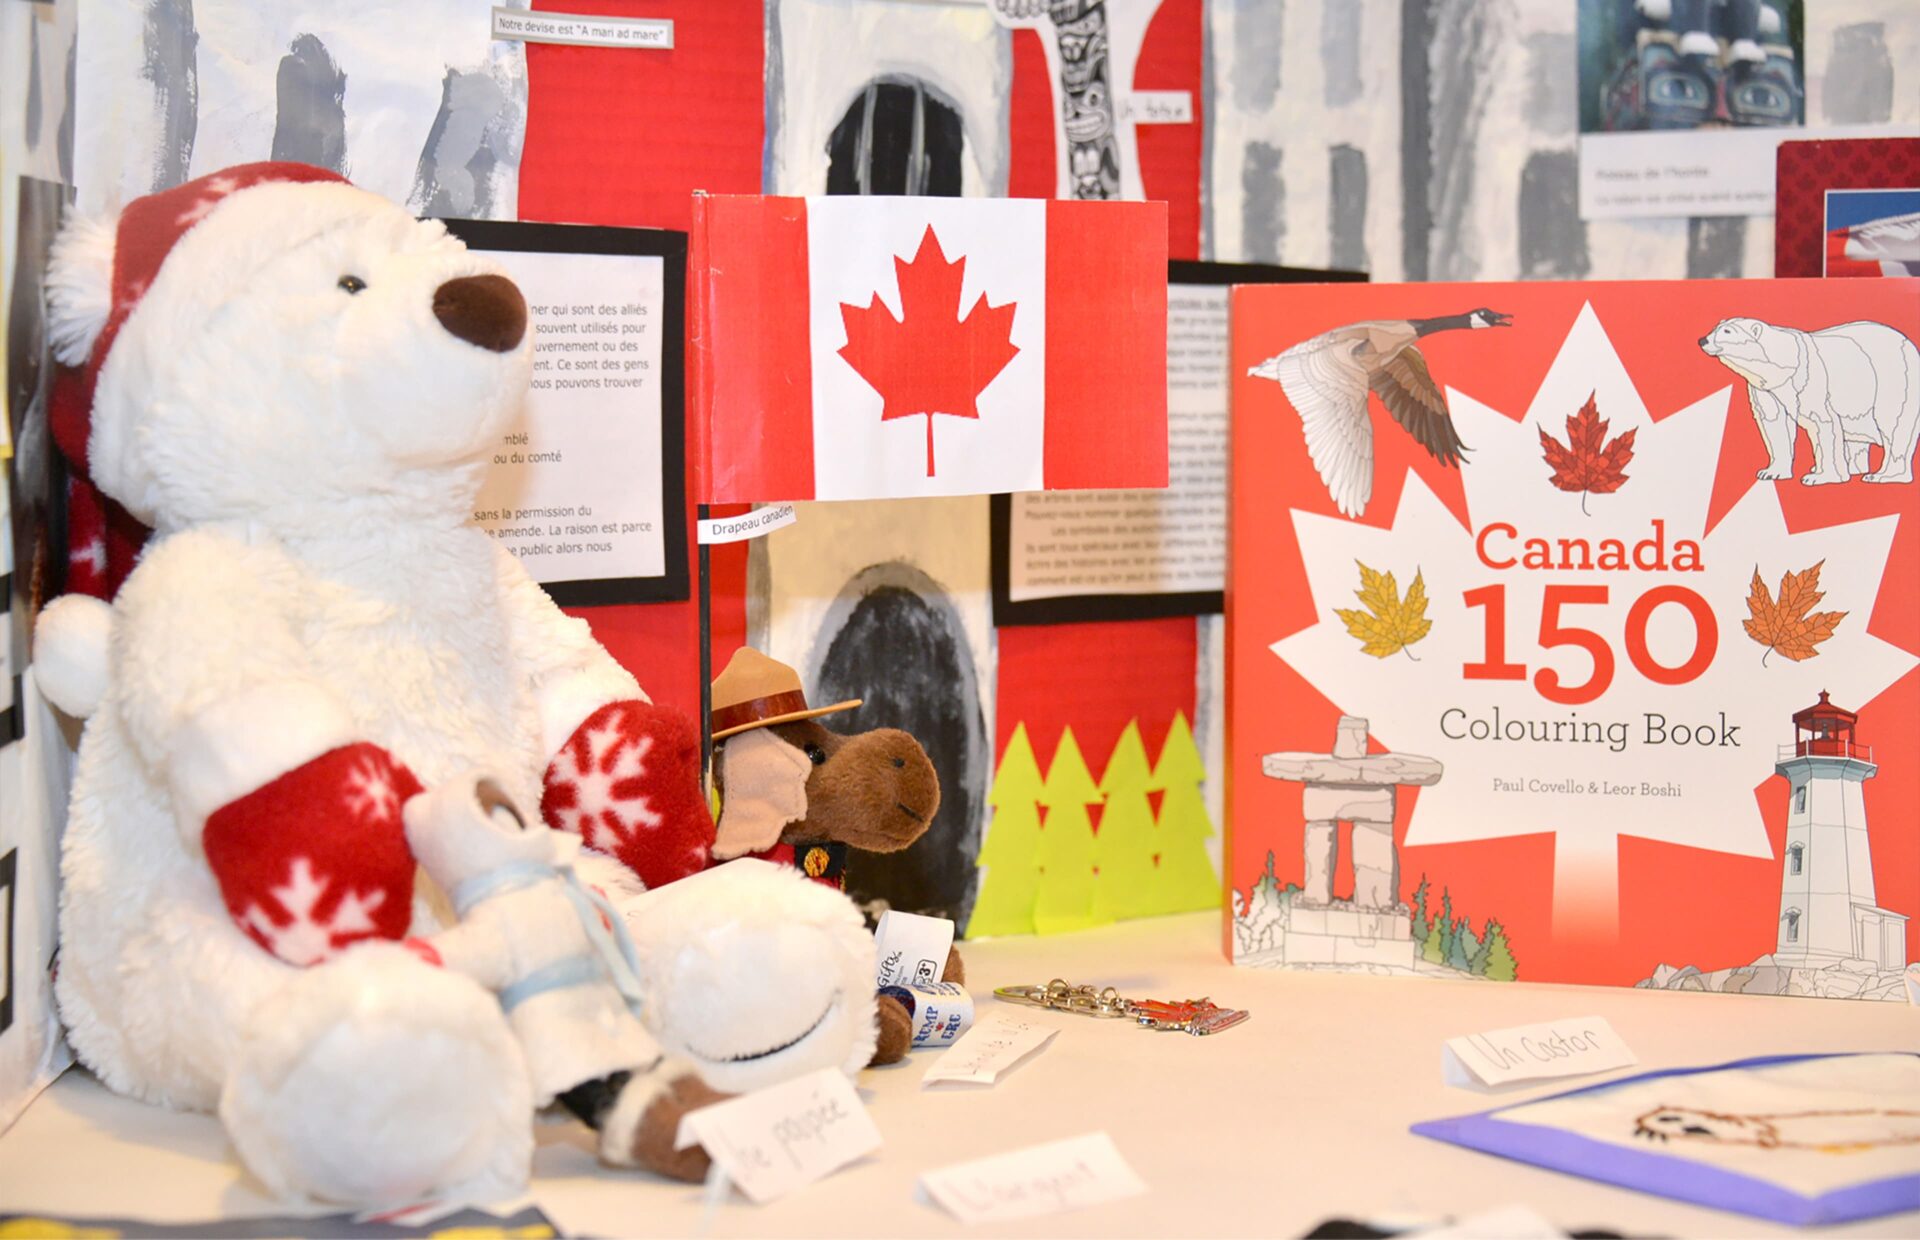 Stuffed toys of a bear and a moose, Canada flag and a book